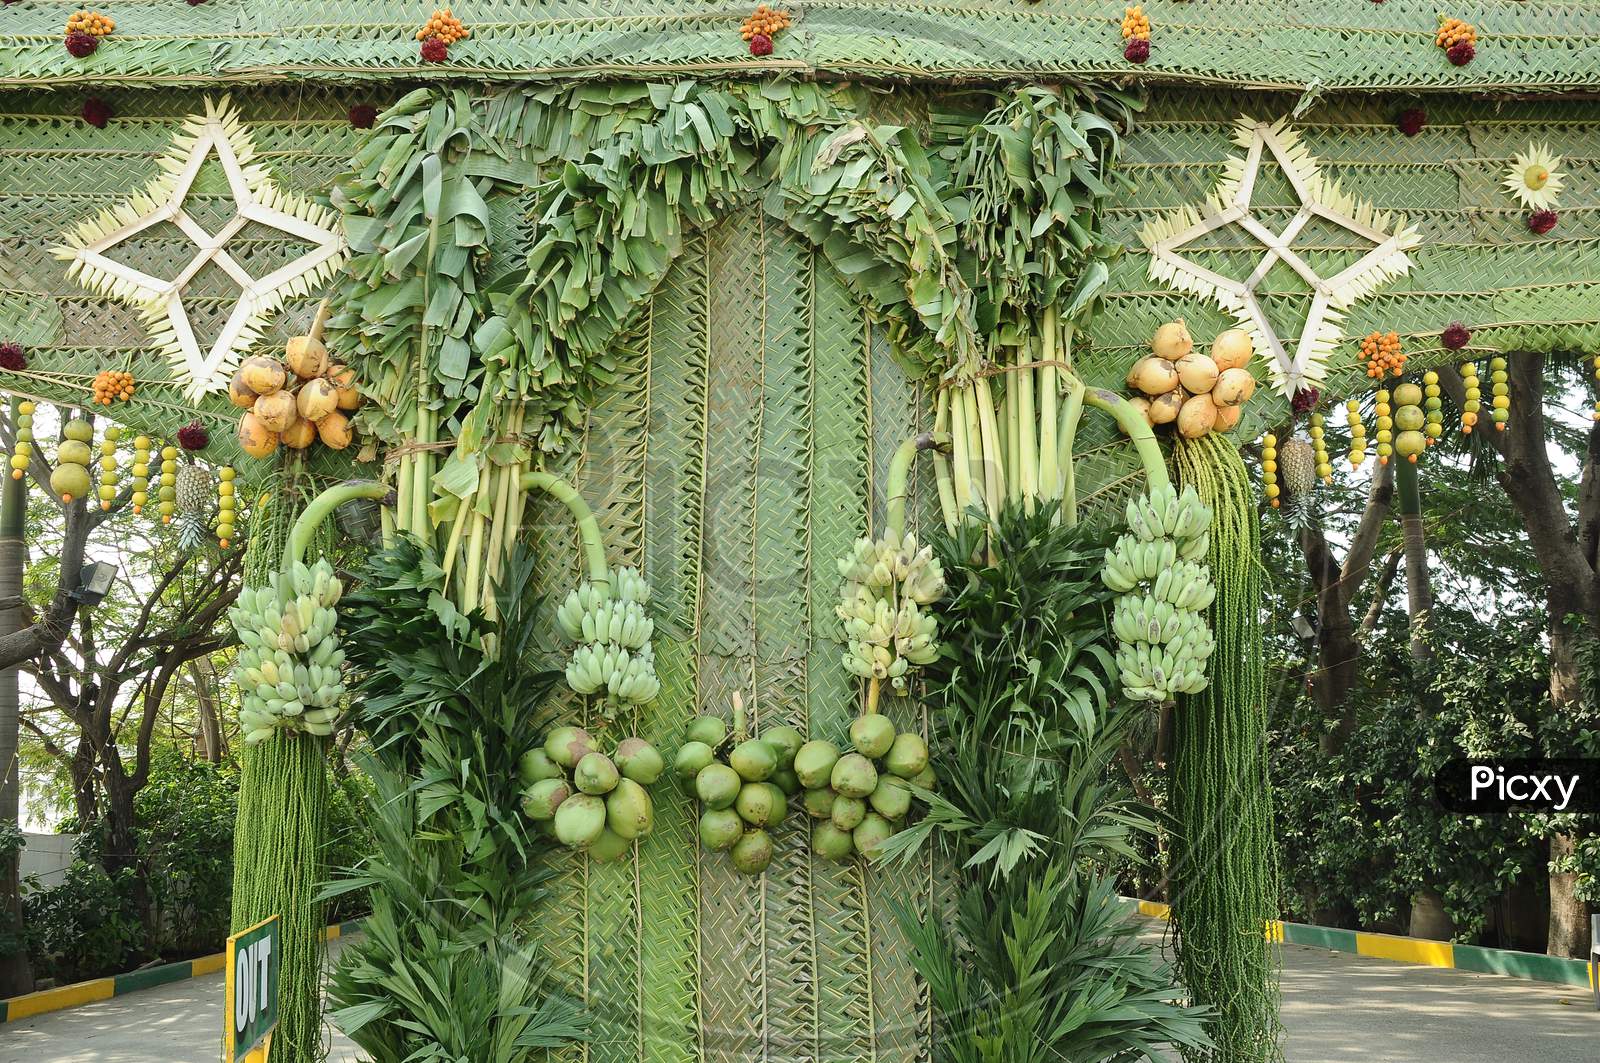 Wedding Venue Decoration With Coconut Leafs And Fruits